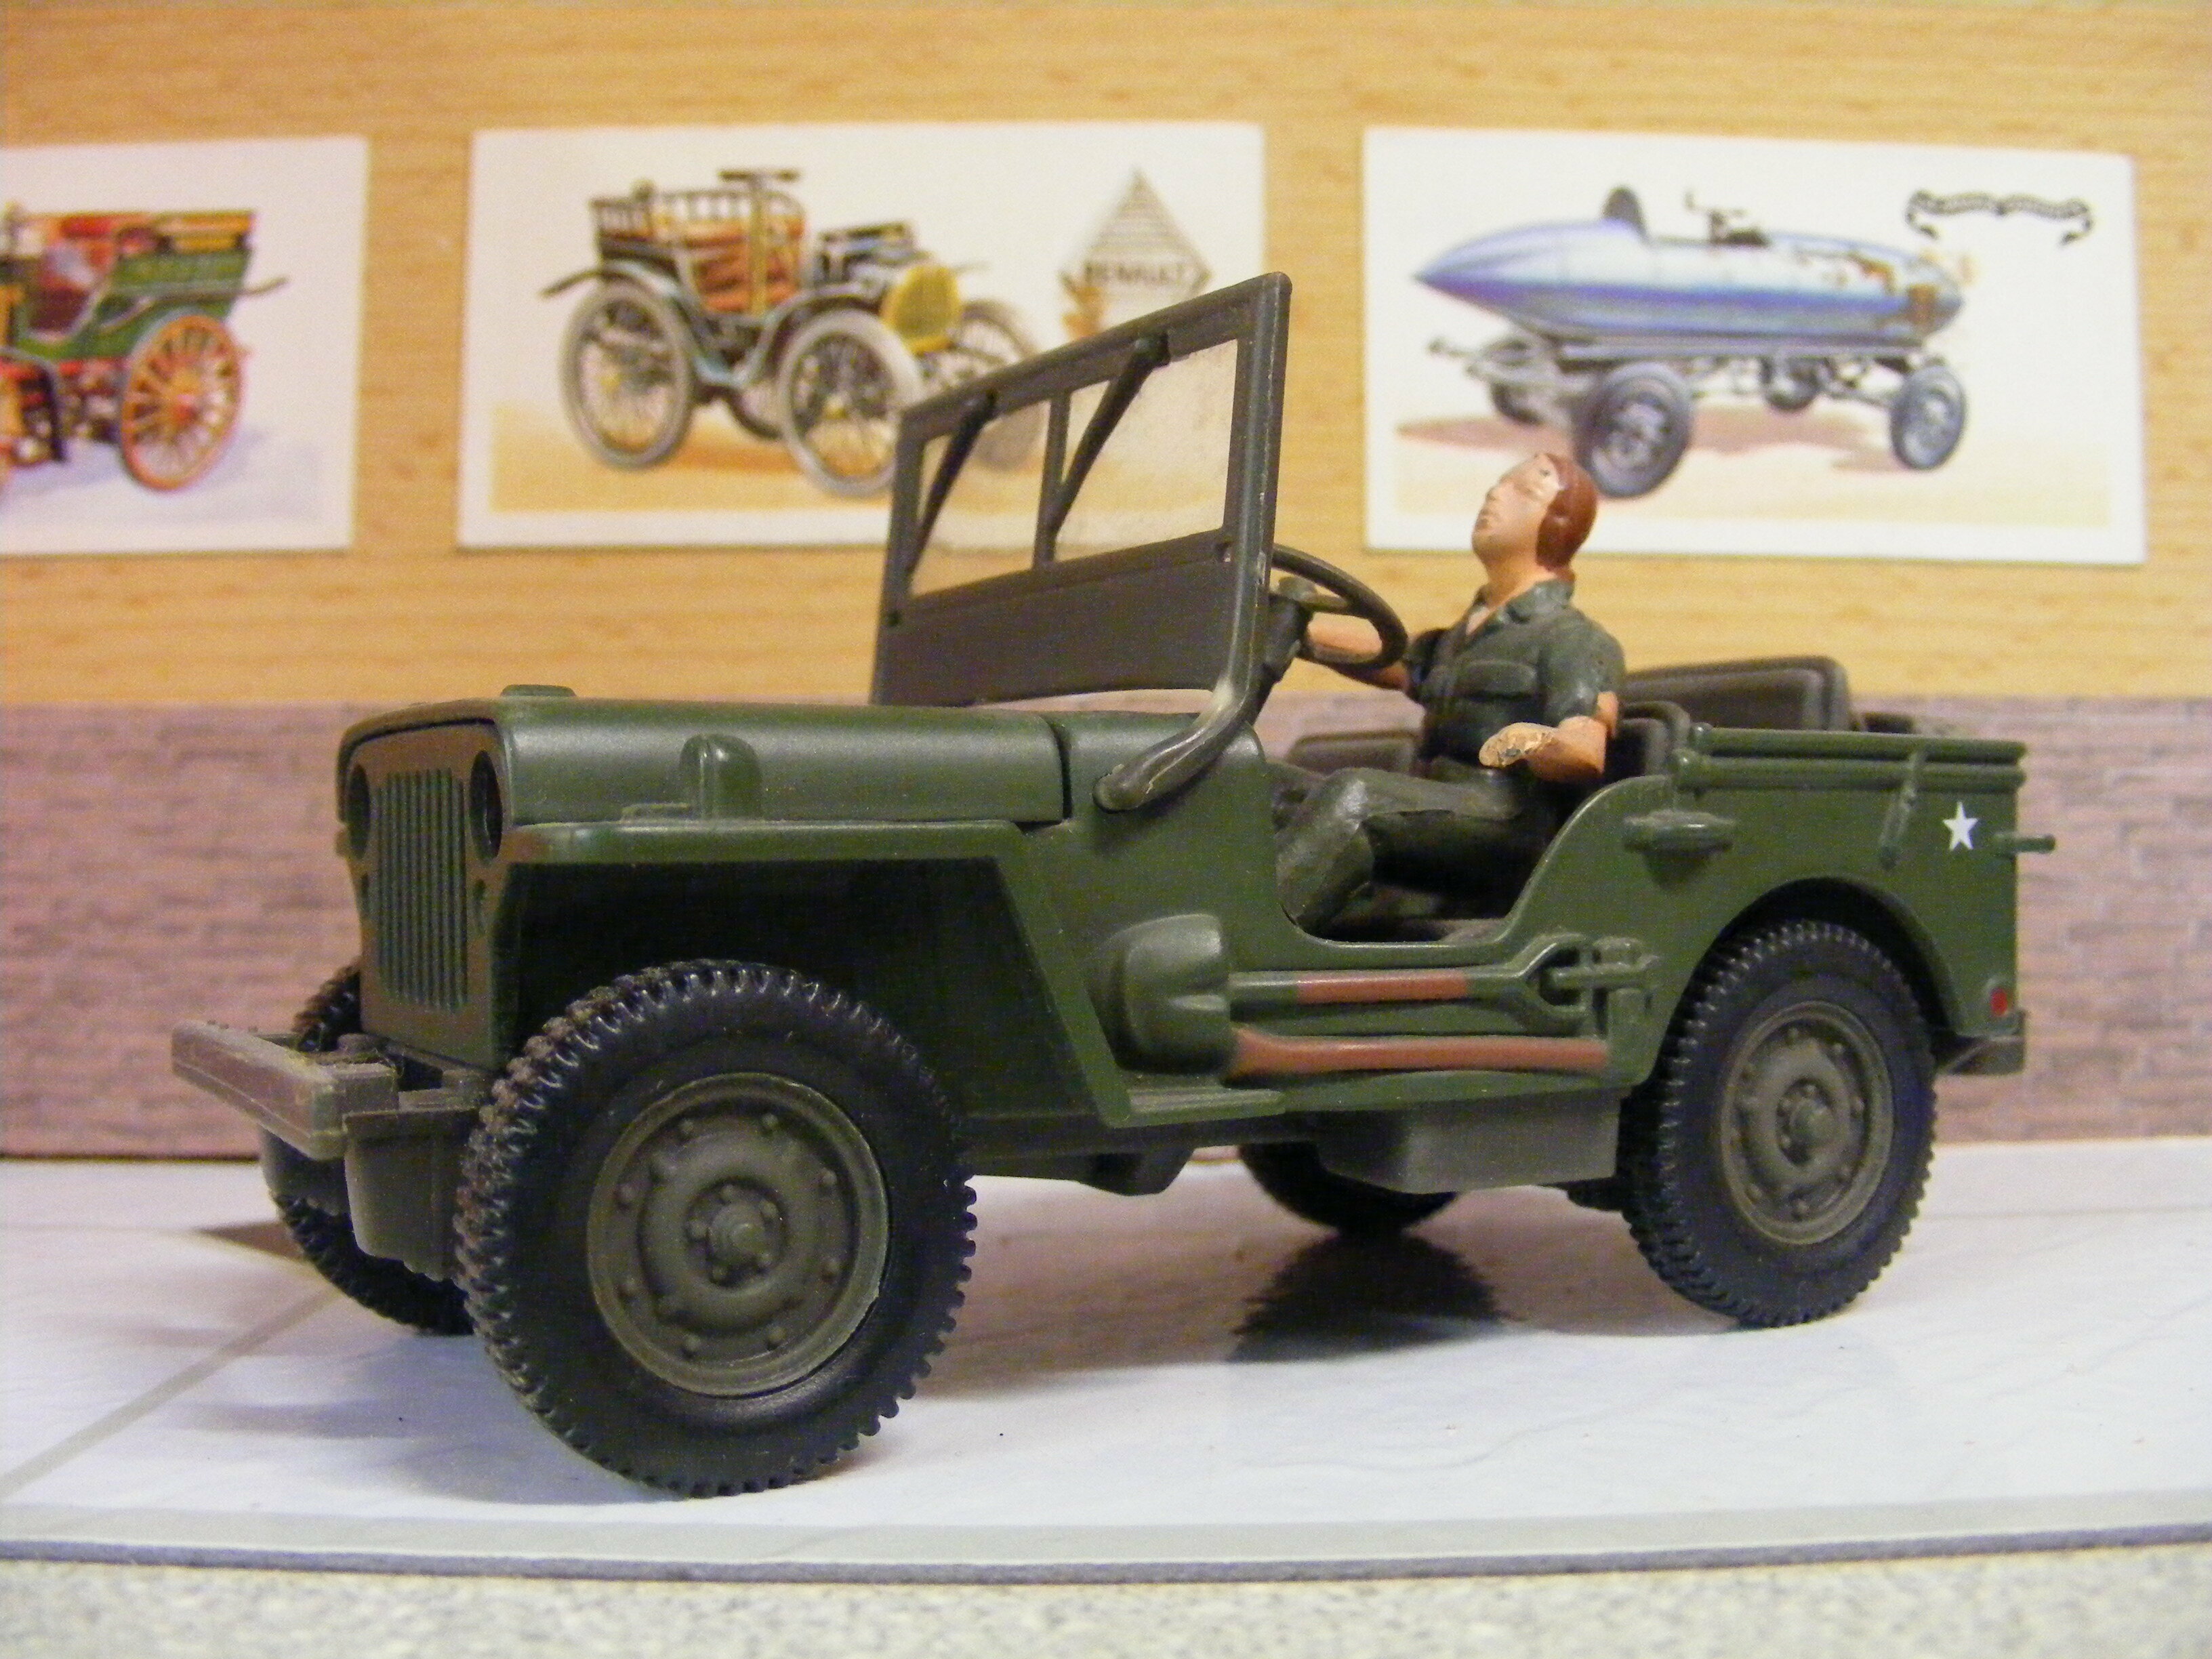 NEW NEW Diecast Military Truck with Jeep,National Motor Museum Mint,1941Willys 